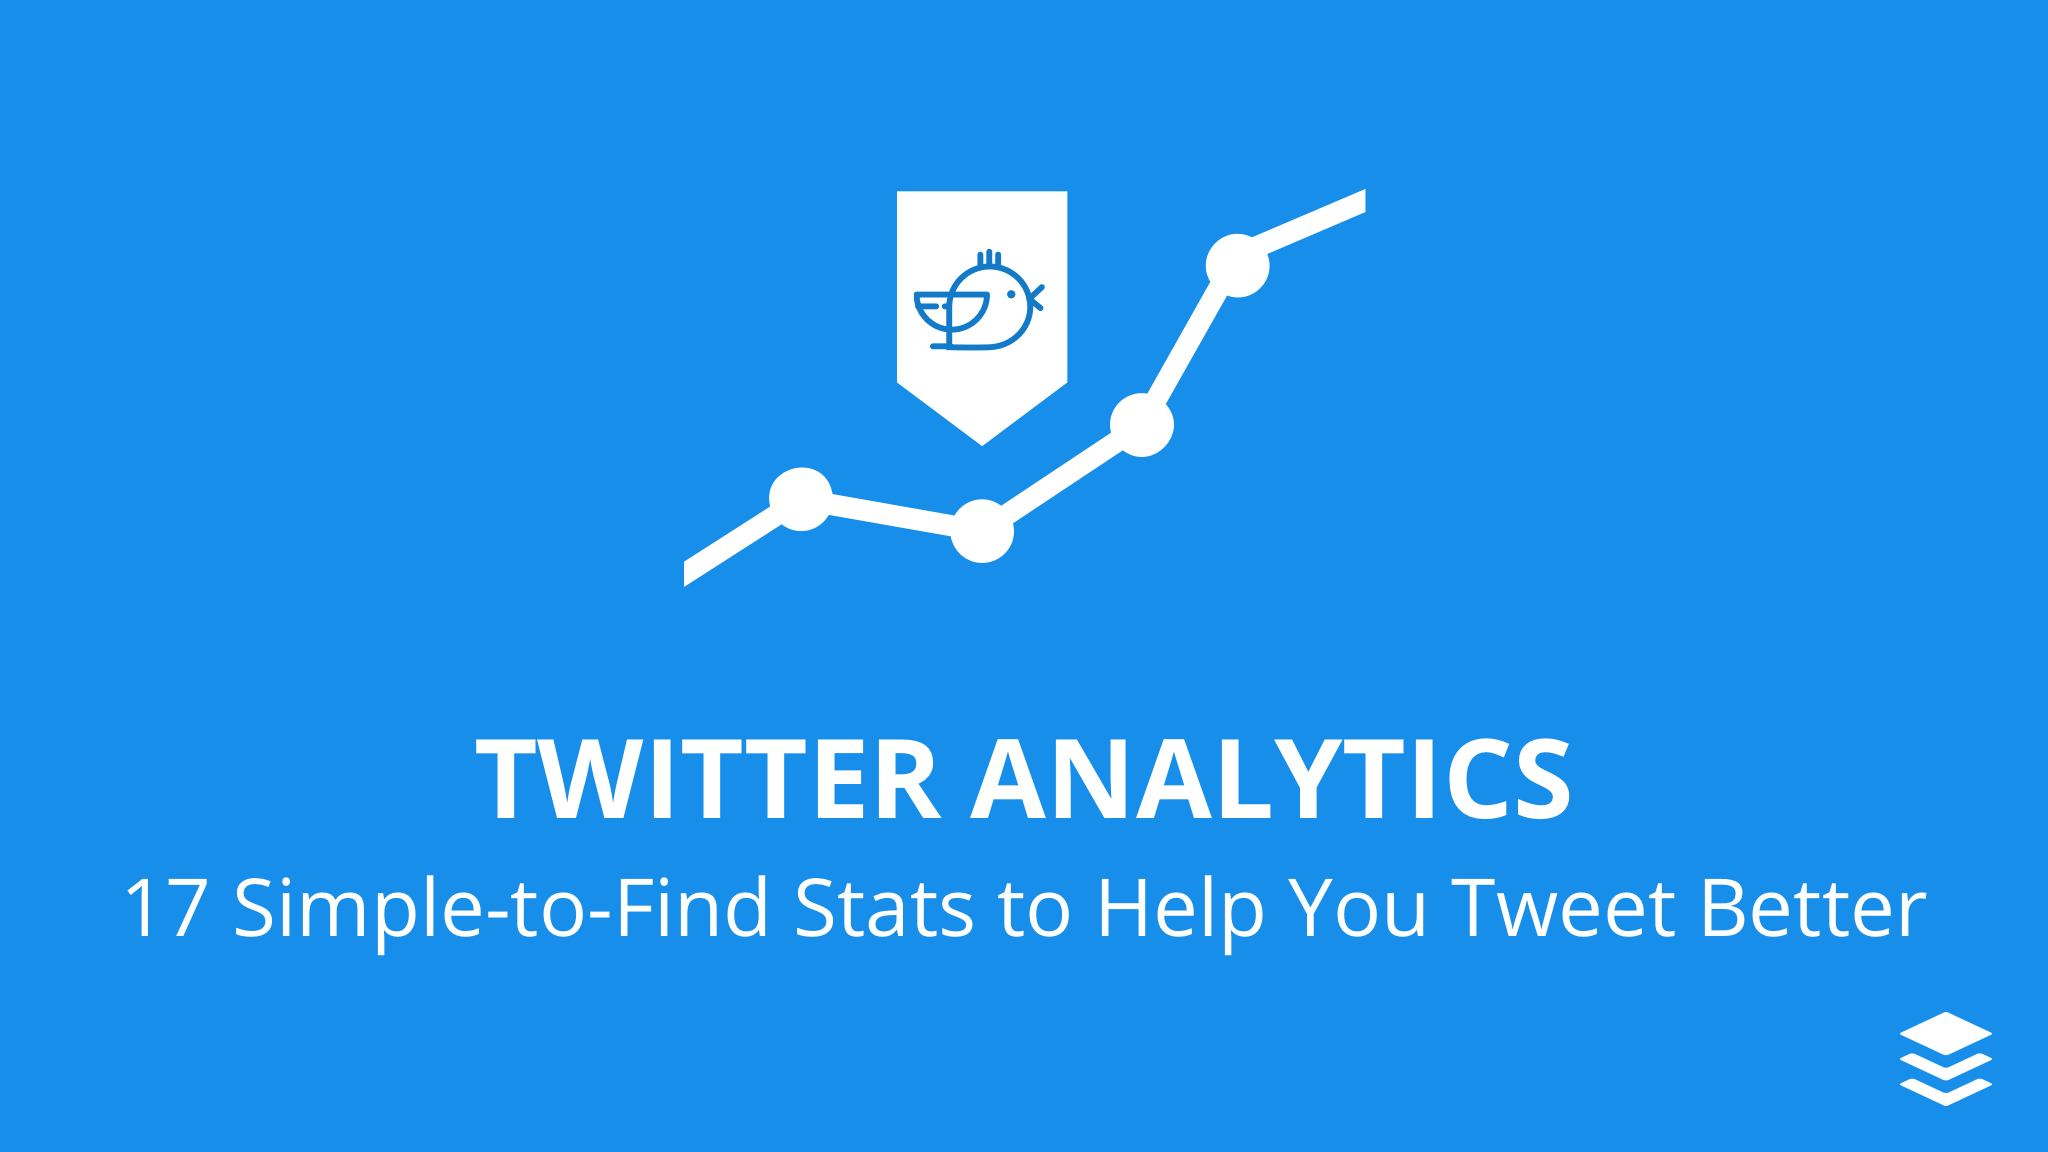 How to Use Twitter Analytics: 17 Simple-to-Find Stats to Help You Tweet Better